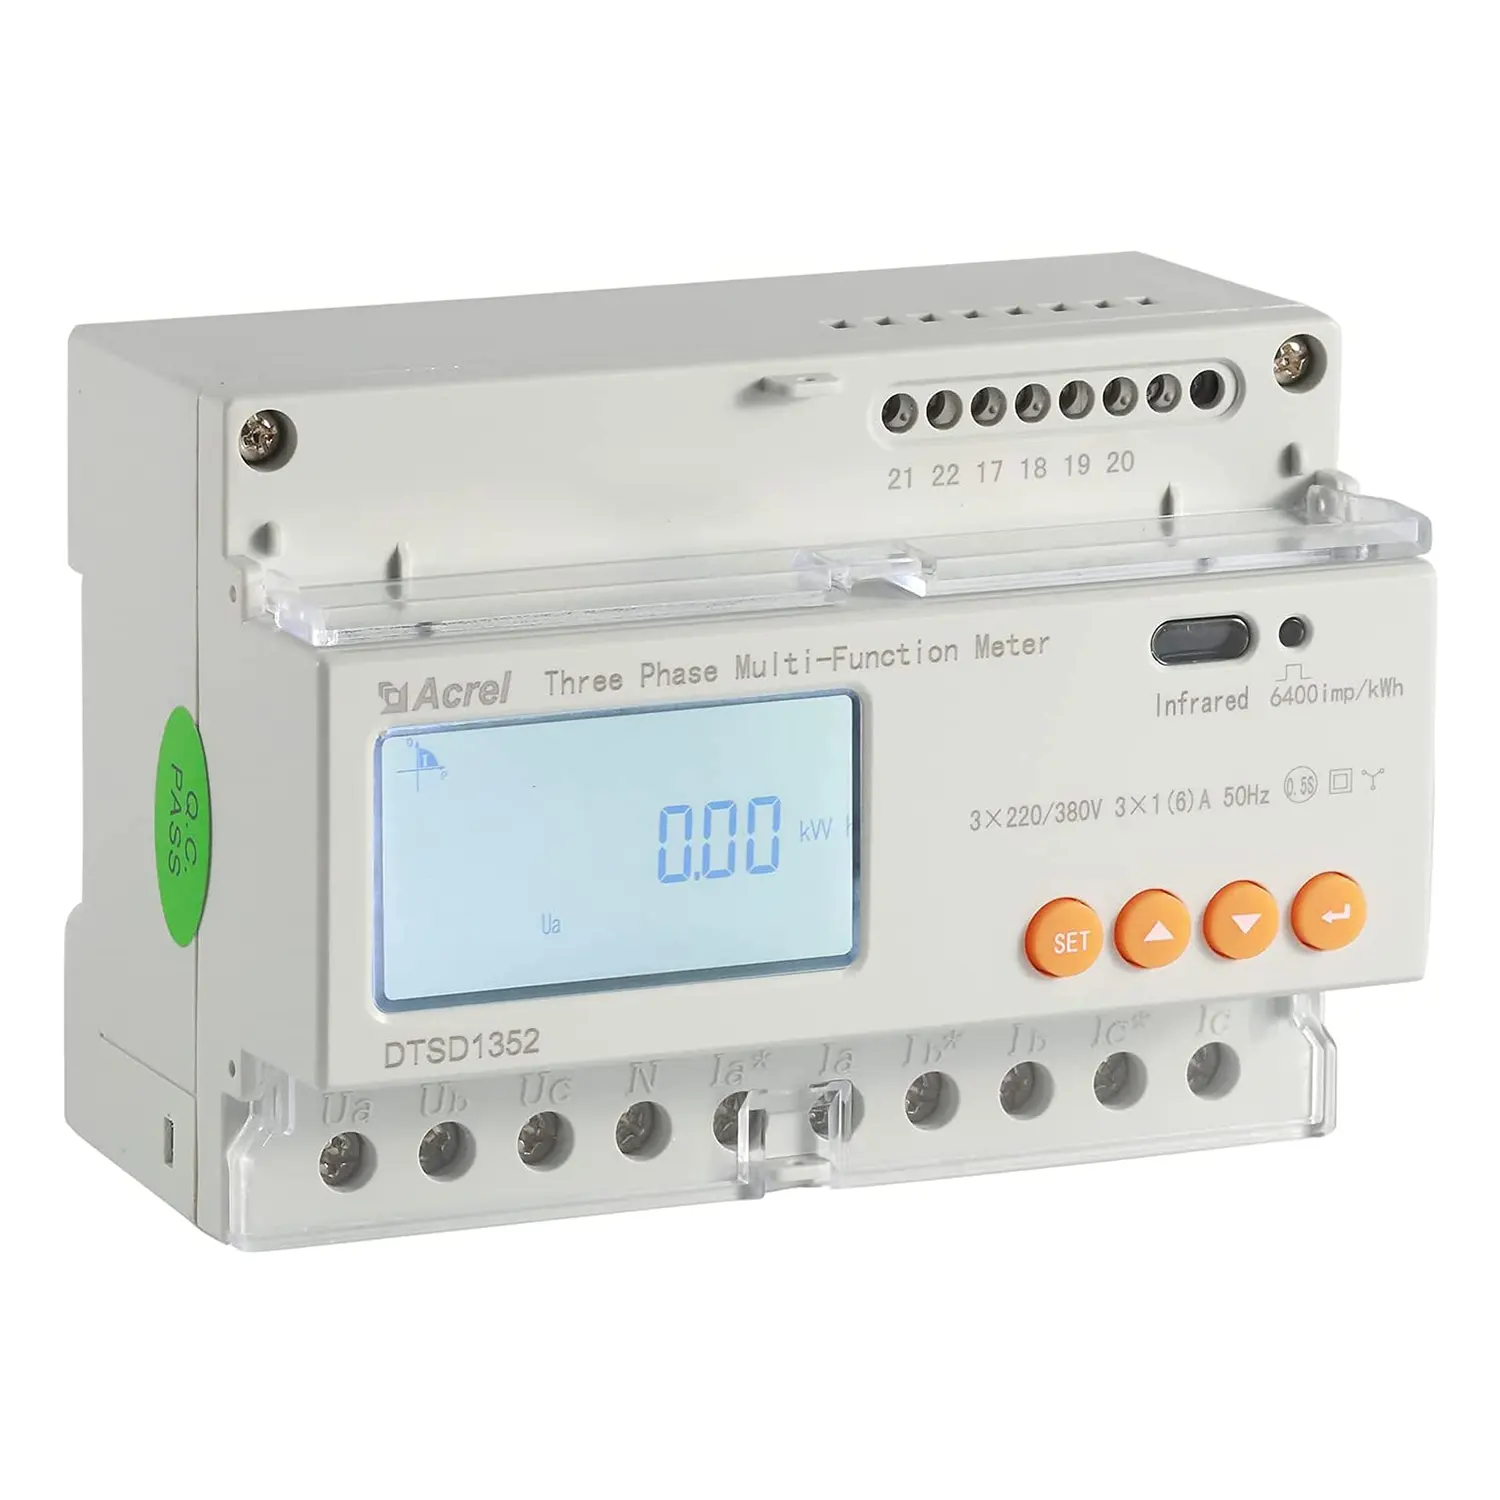 Acrel DTSD1352-C 3 Phase Din Rail Multifunction Meter LCD Display Power Meter Rs485 CE MID Approved For Solar